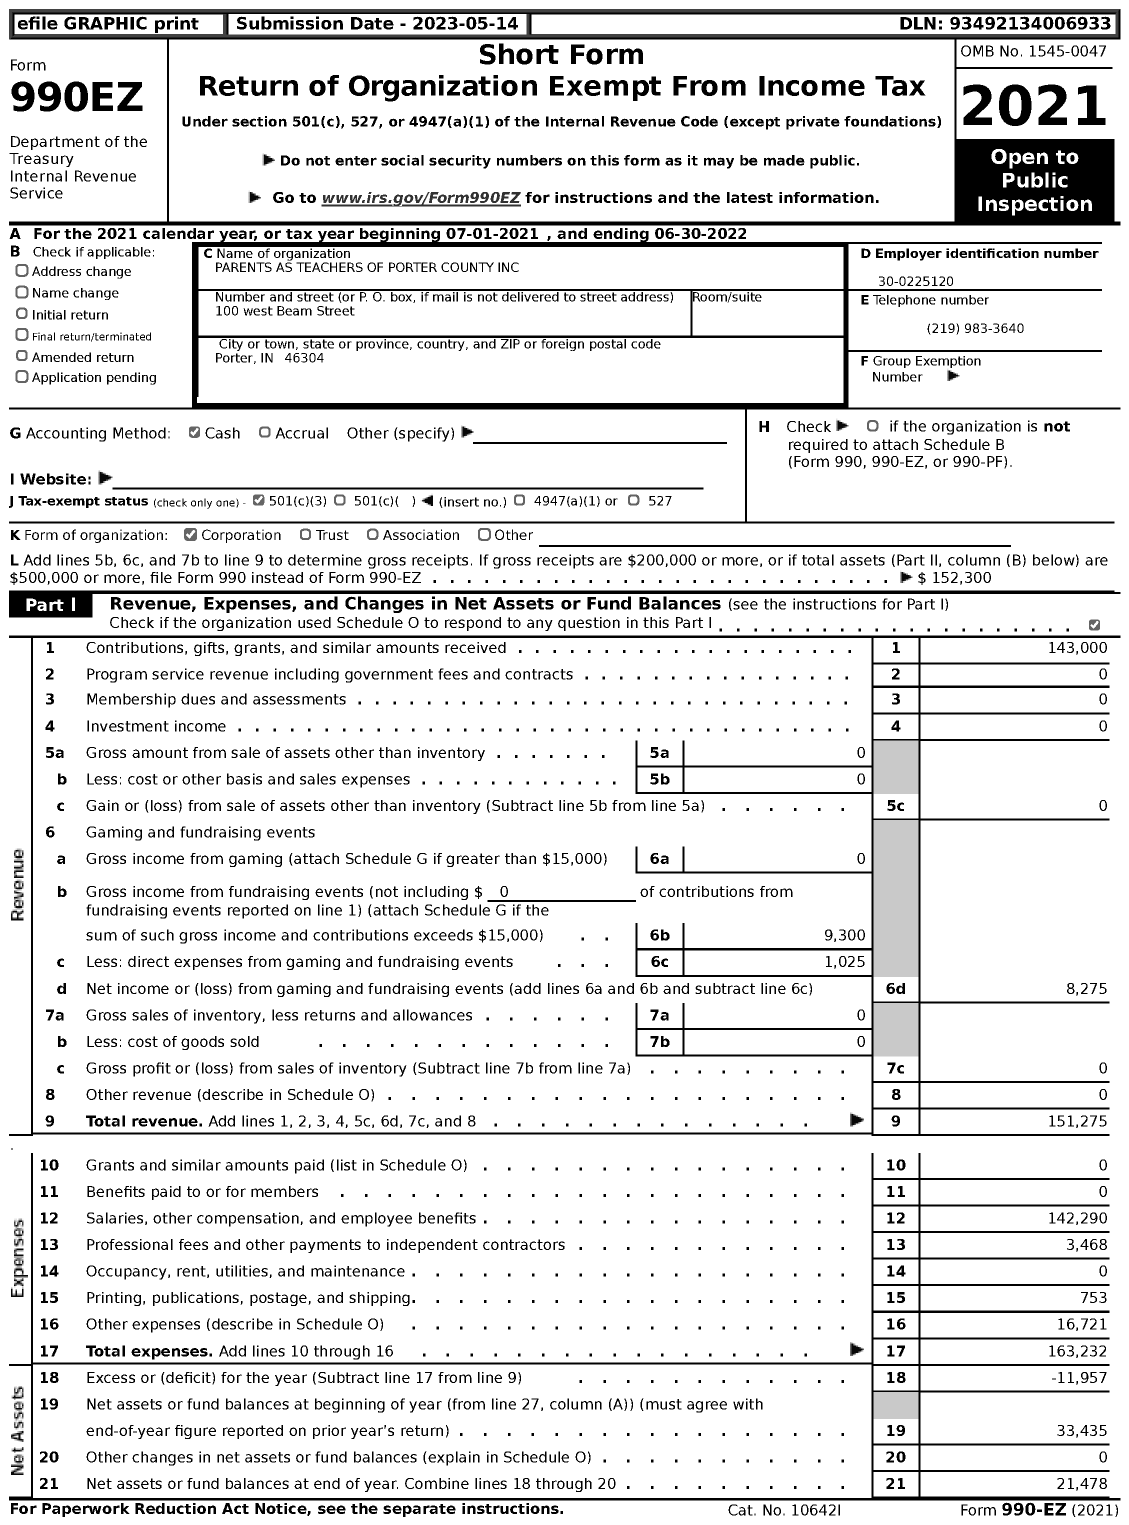 Image of first page of 2021 Form 990EZ for Parents As Teachers of Porter County